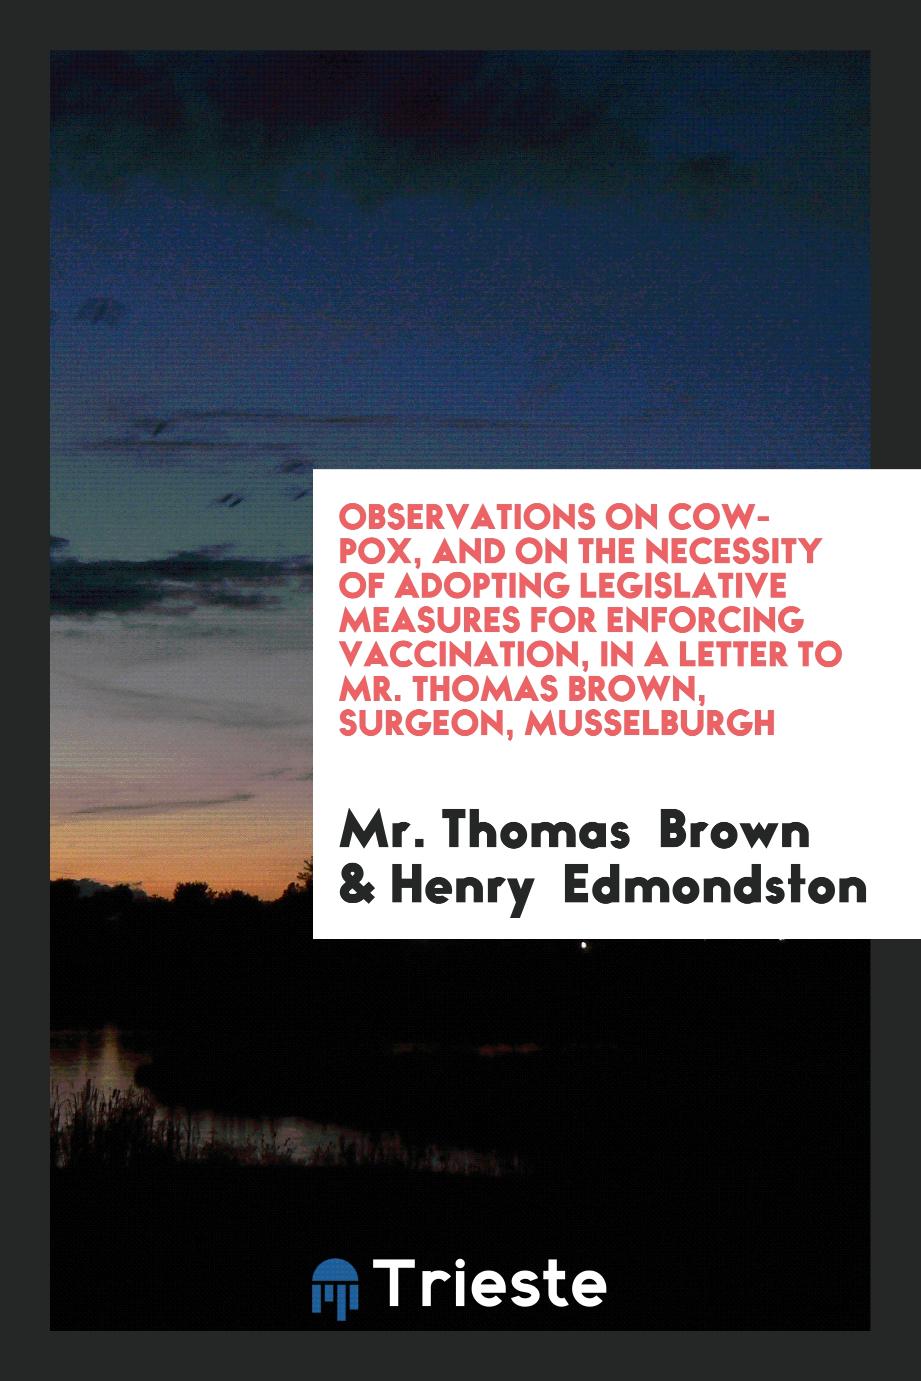 Observations on Cow-Pox, and on the Necessity of Adopting Legislative Measures for Enforcing Vaccination, in a Letter to Mr. Thomas Brown, Surgeon, Musselburgh